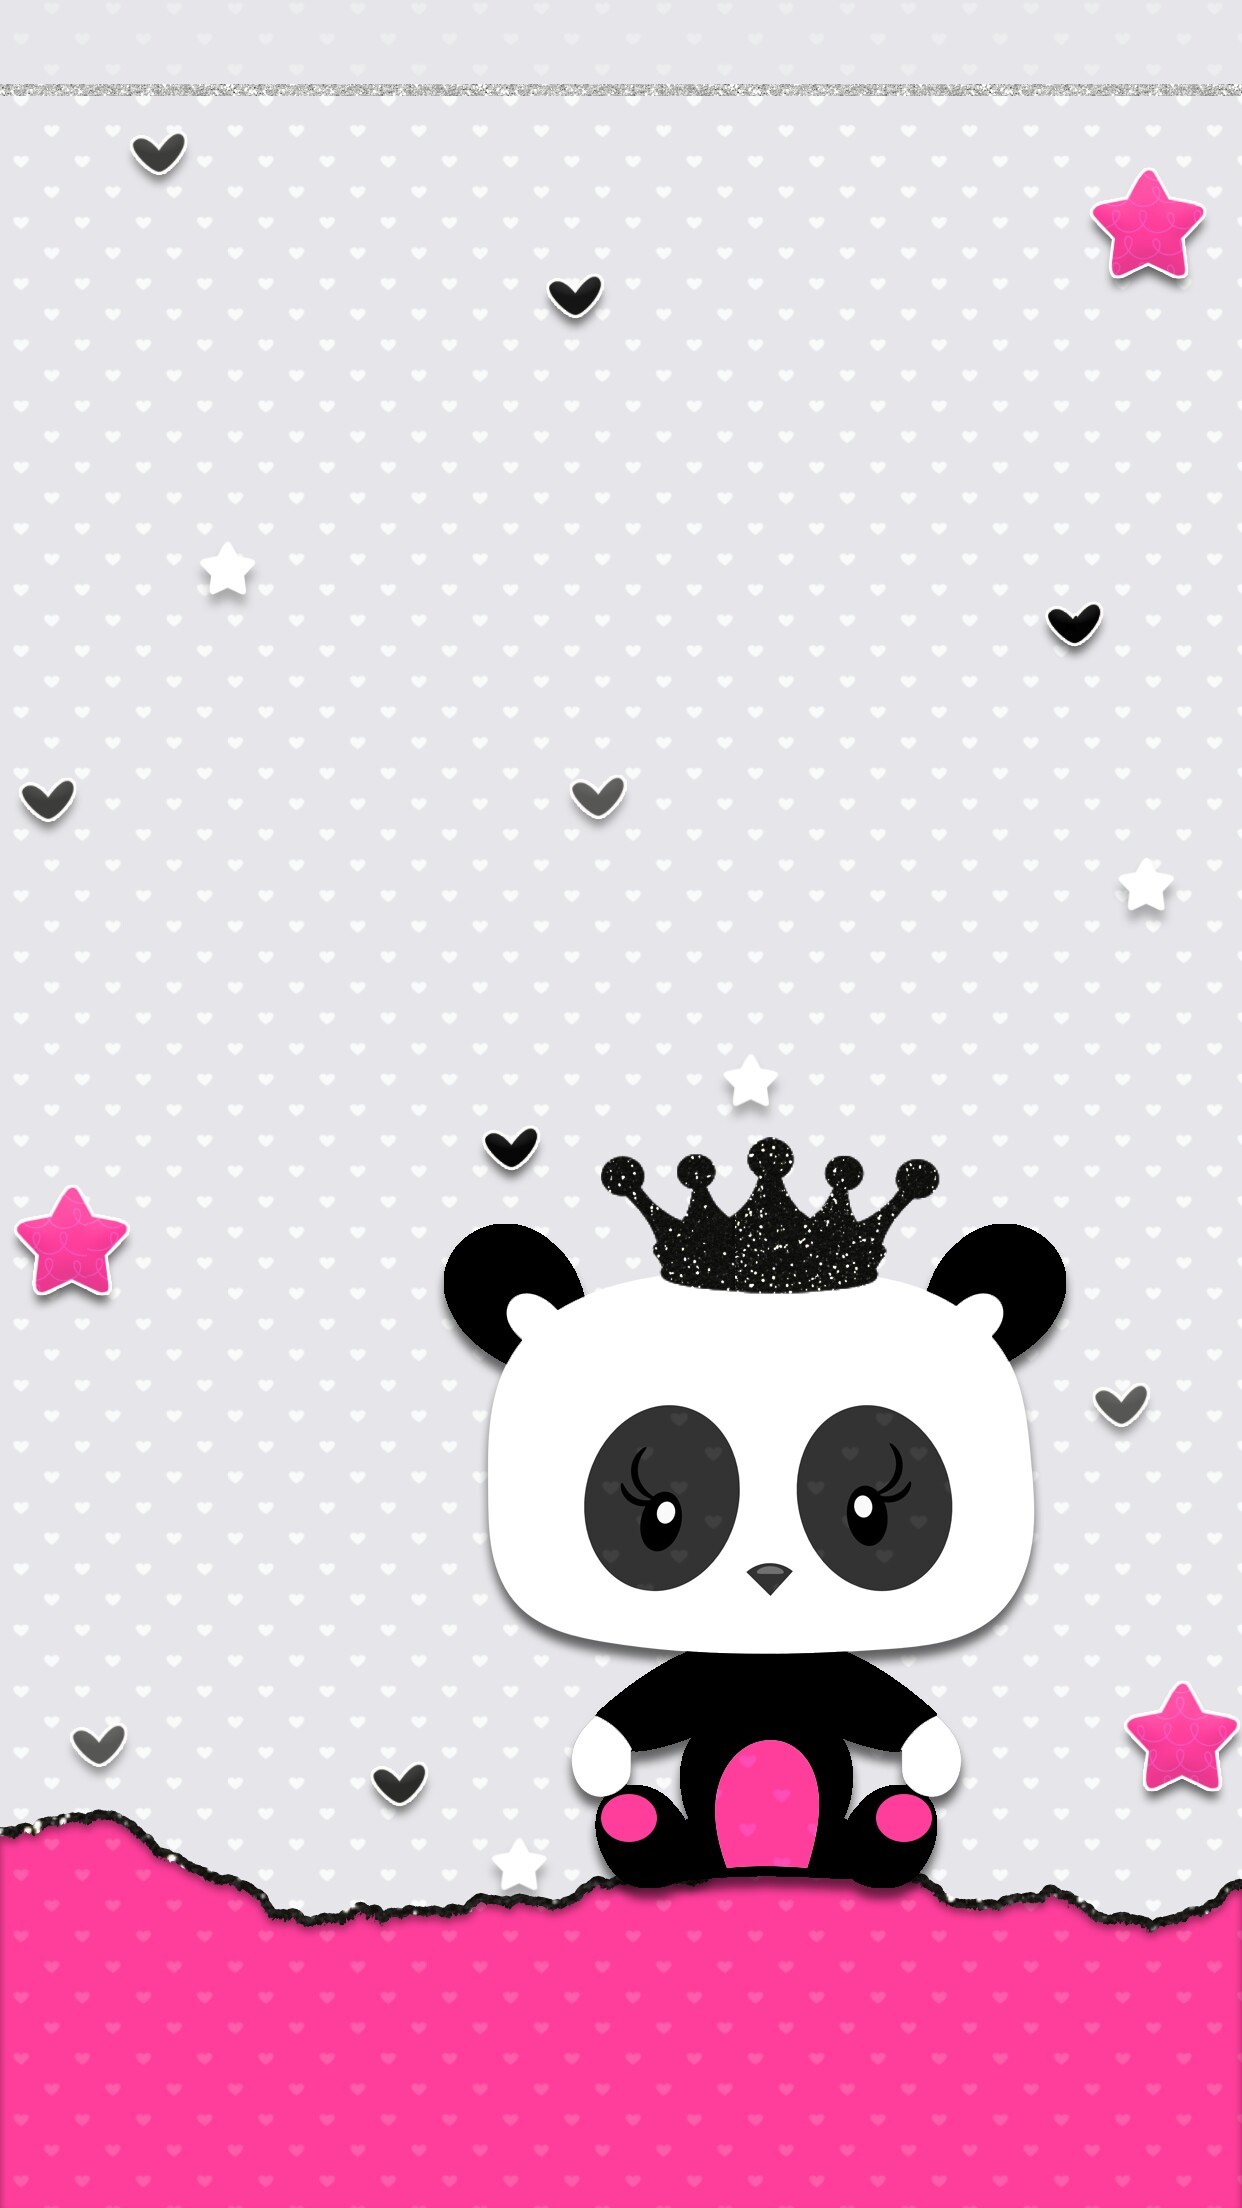 A pink and black bear with stars on it - Panda